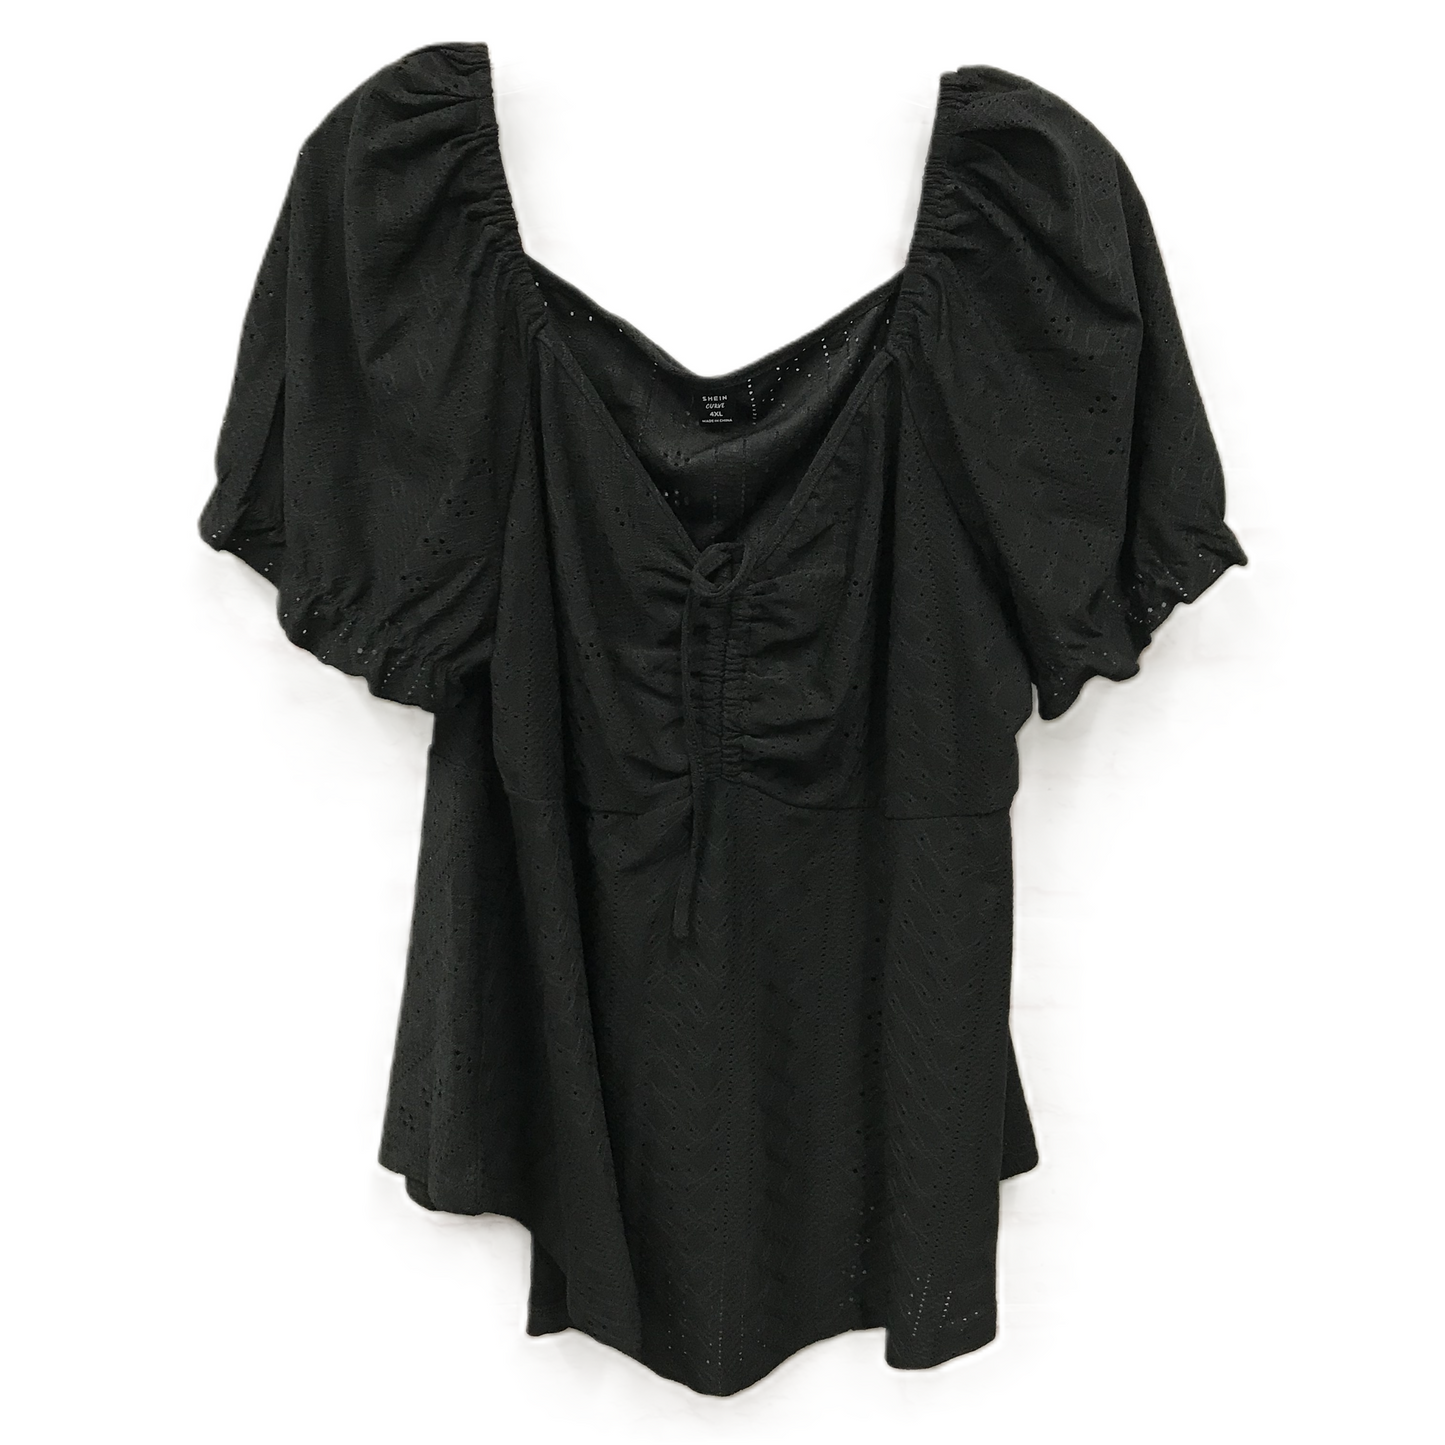 Black Top Short Sleeve By Shein, Size: 4x